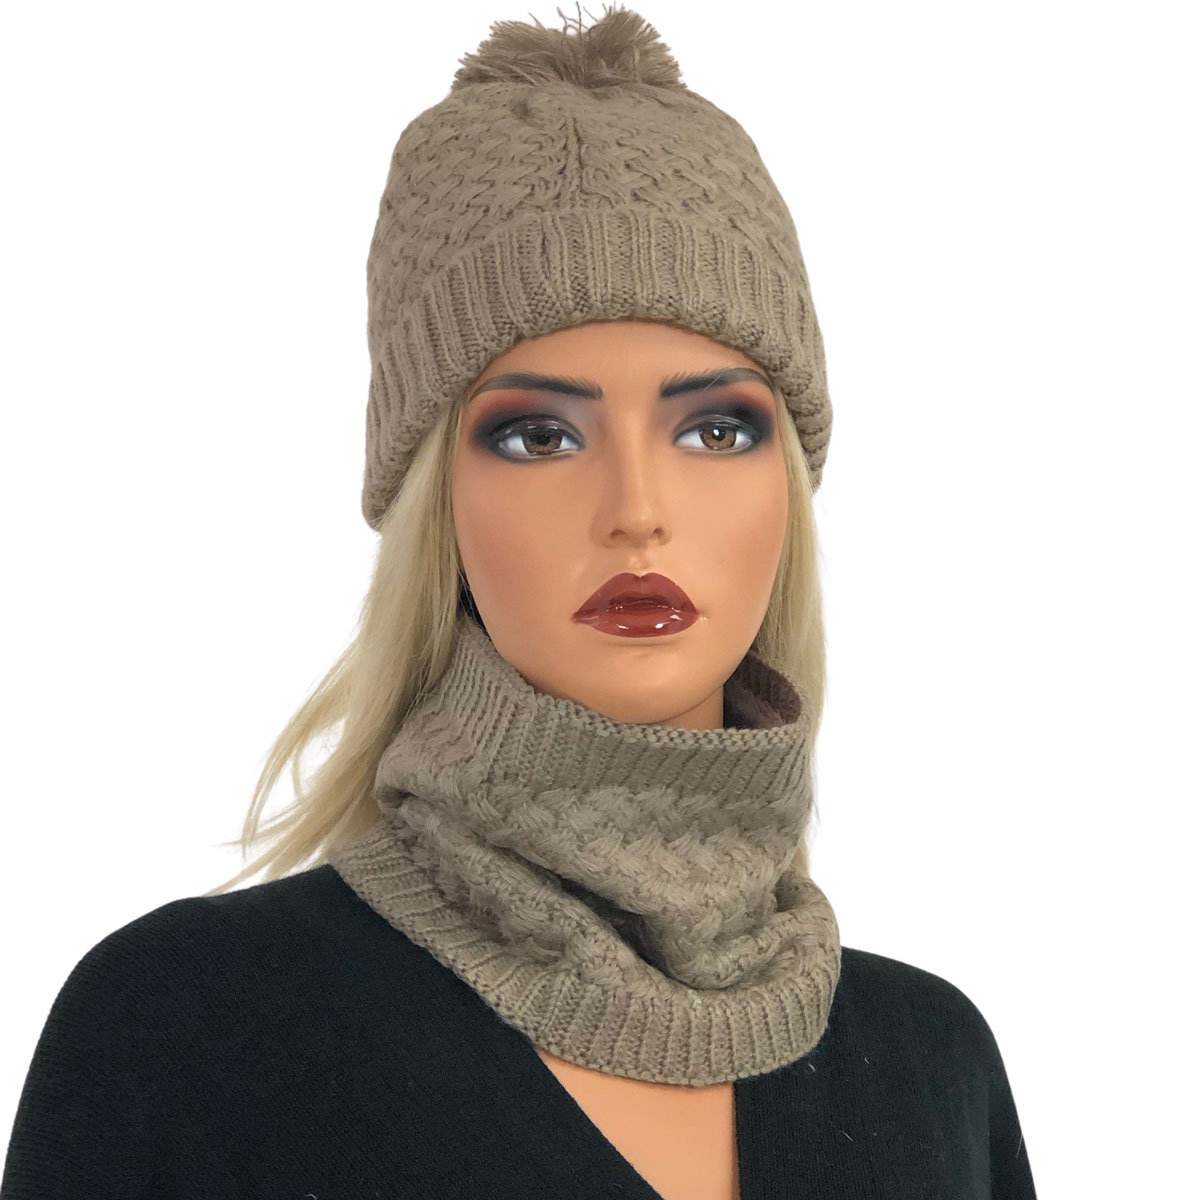 3114 - Winter Knit Hats LC:HSET BEIGE Hat and Neck Warmer Set w/Fur Lining - One Size Fits Most